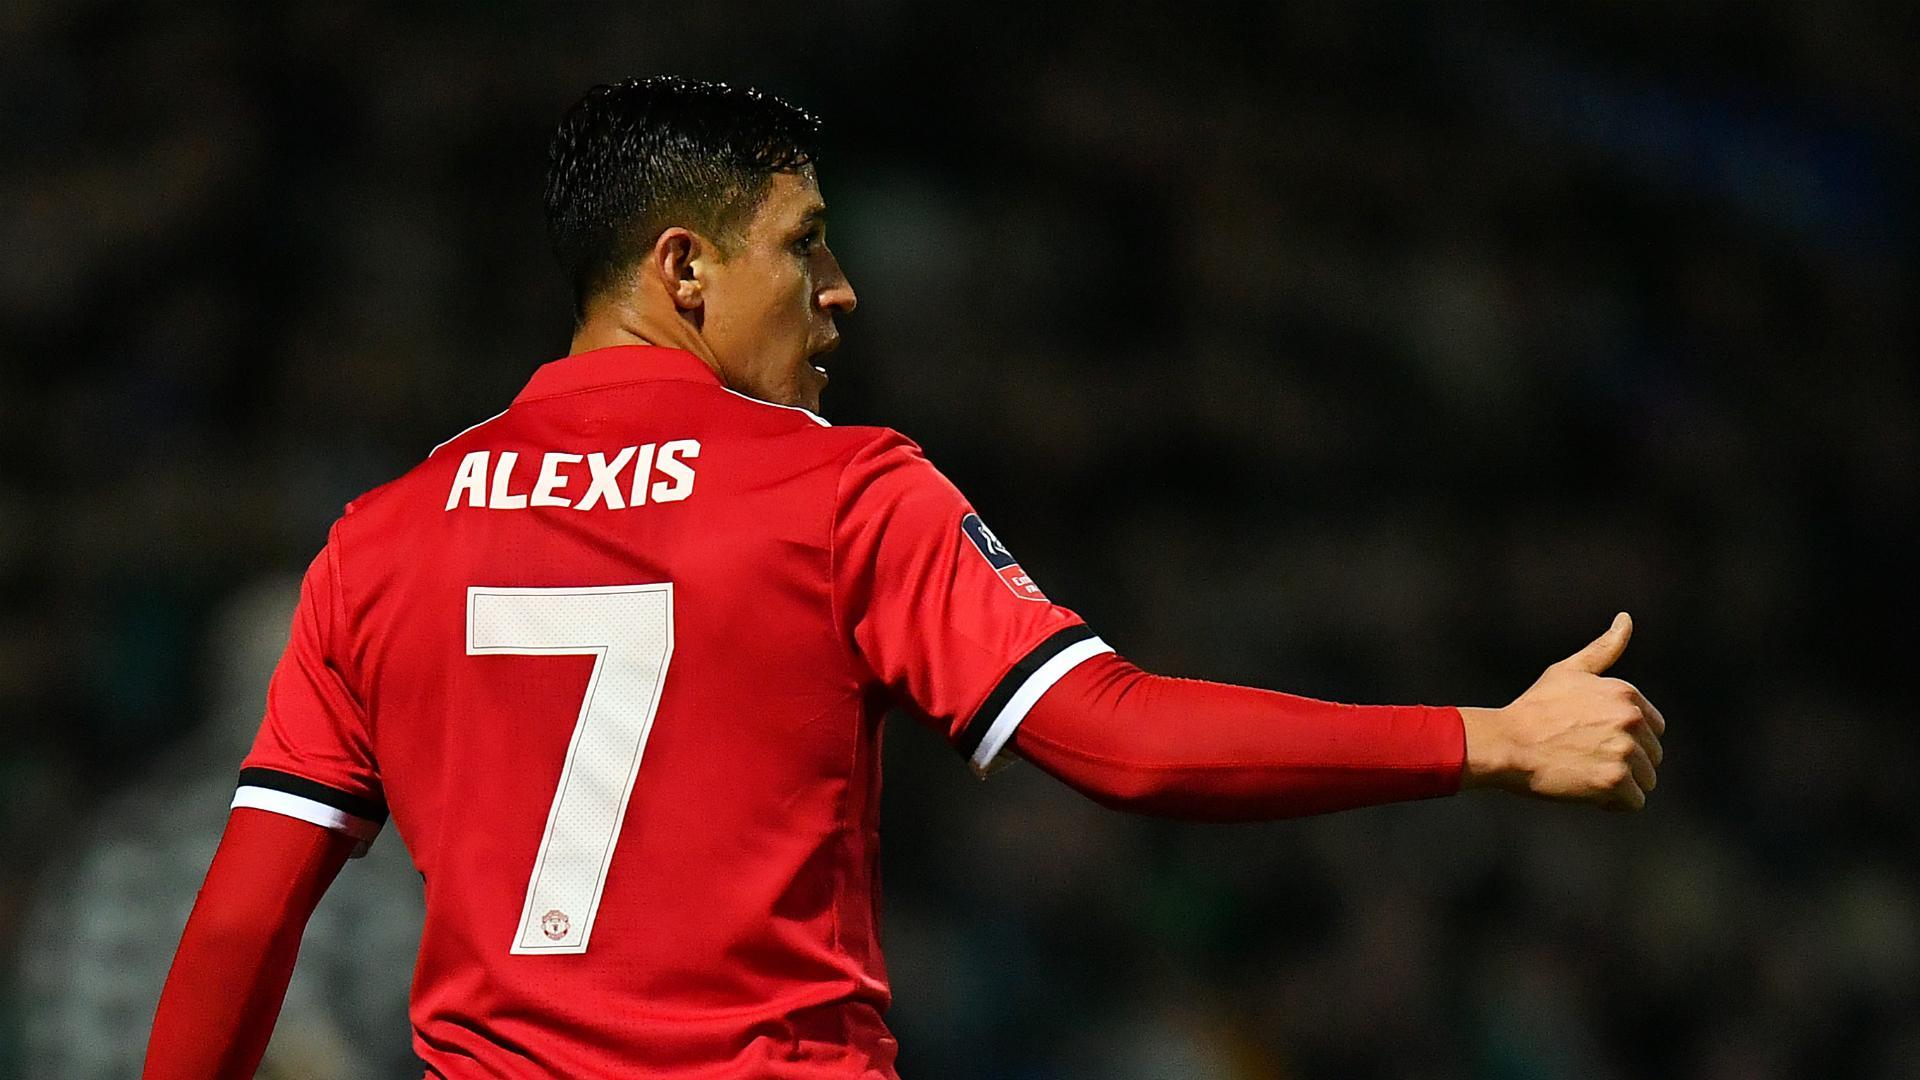 Man Utd star could persuade complete midfielder to join, despite